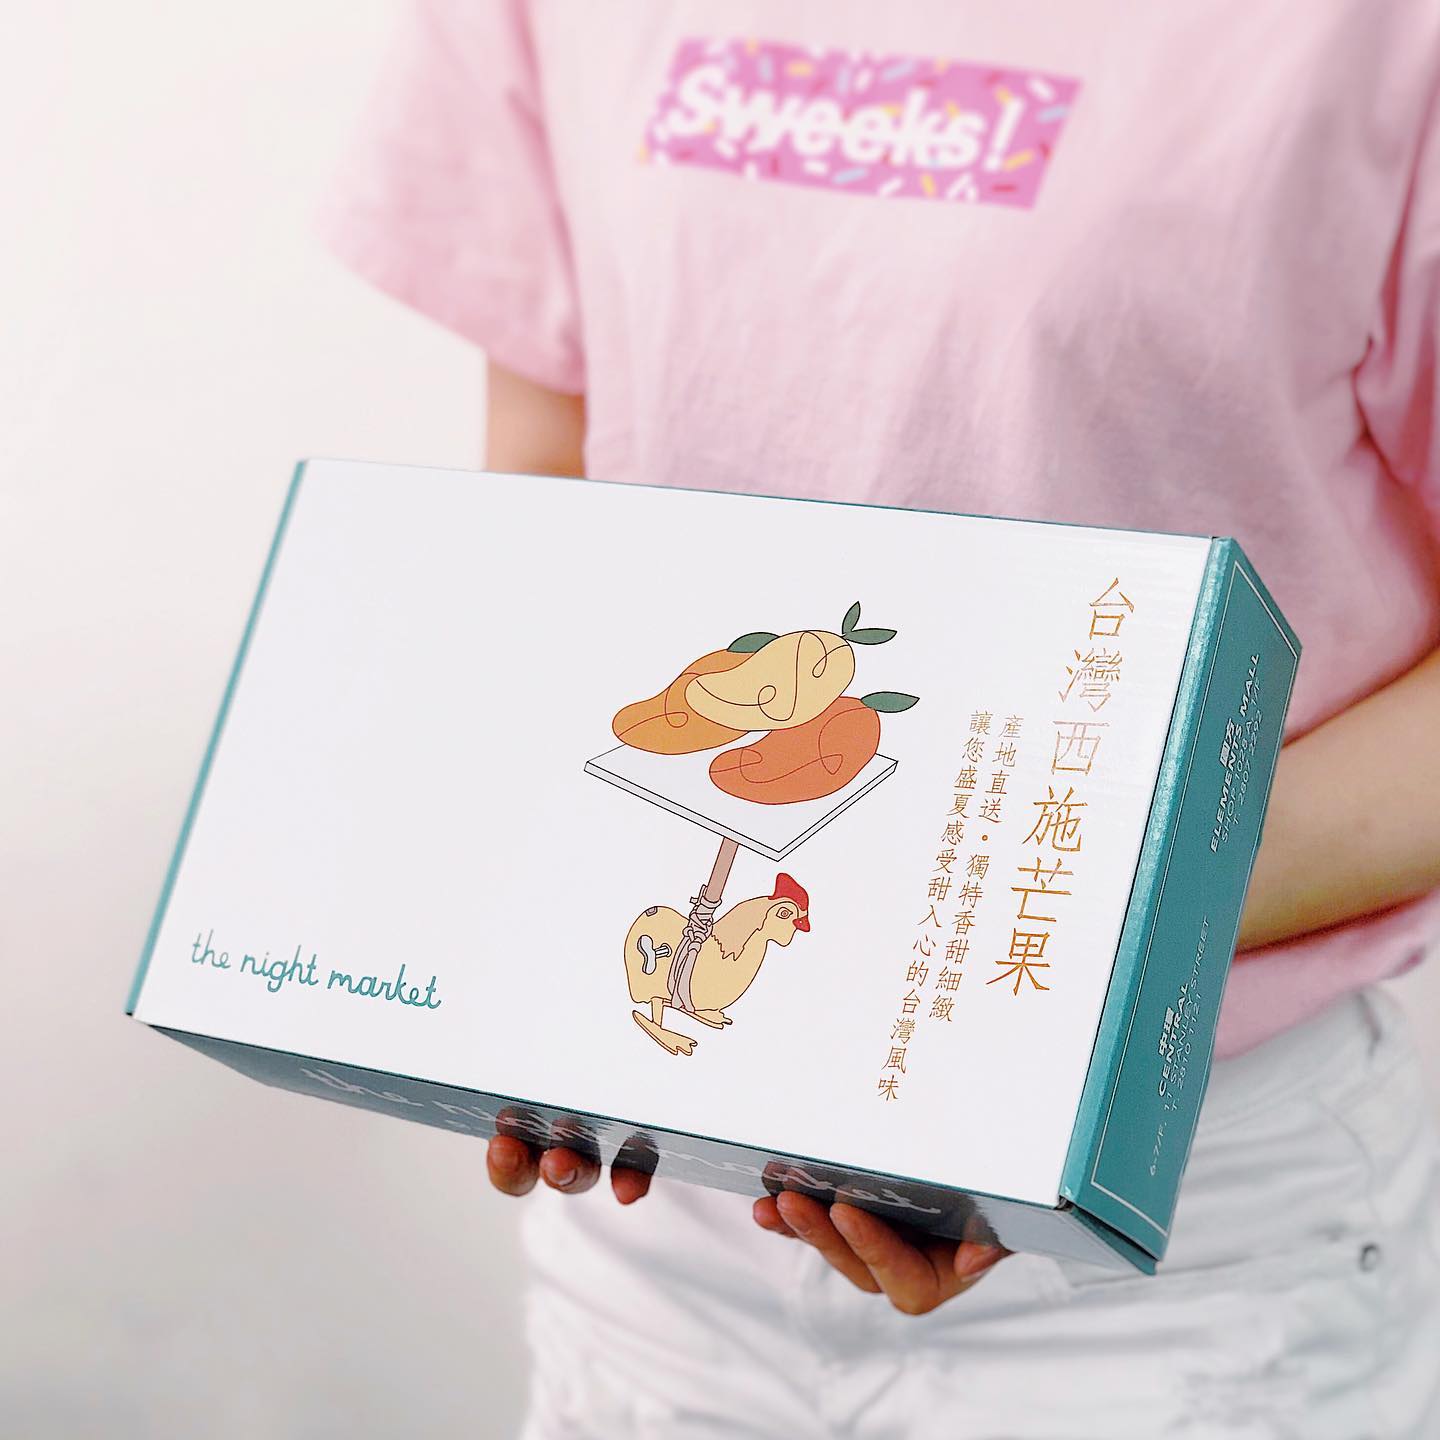 Food tastes better when shared😍, order our Xishi Mango Gift Box to share some sweetness with your family and friends